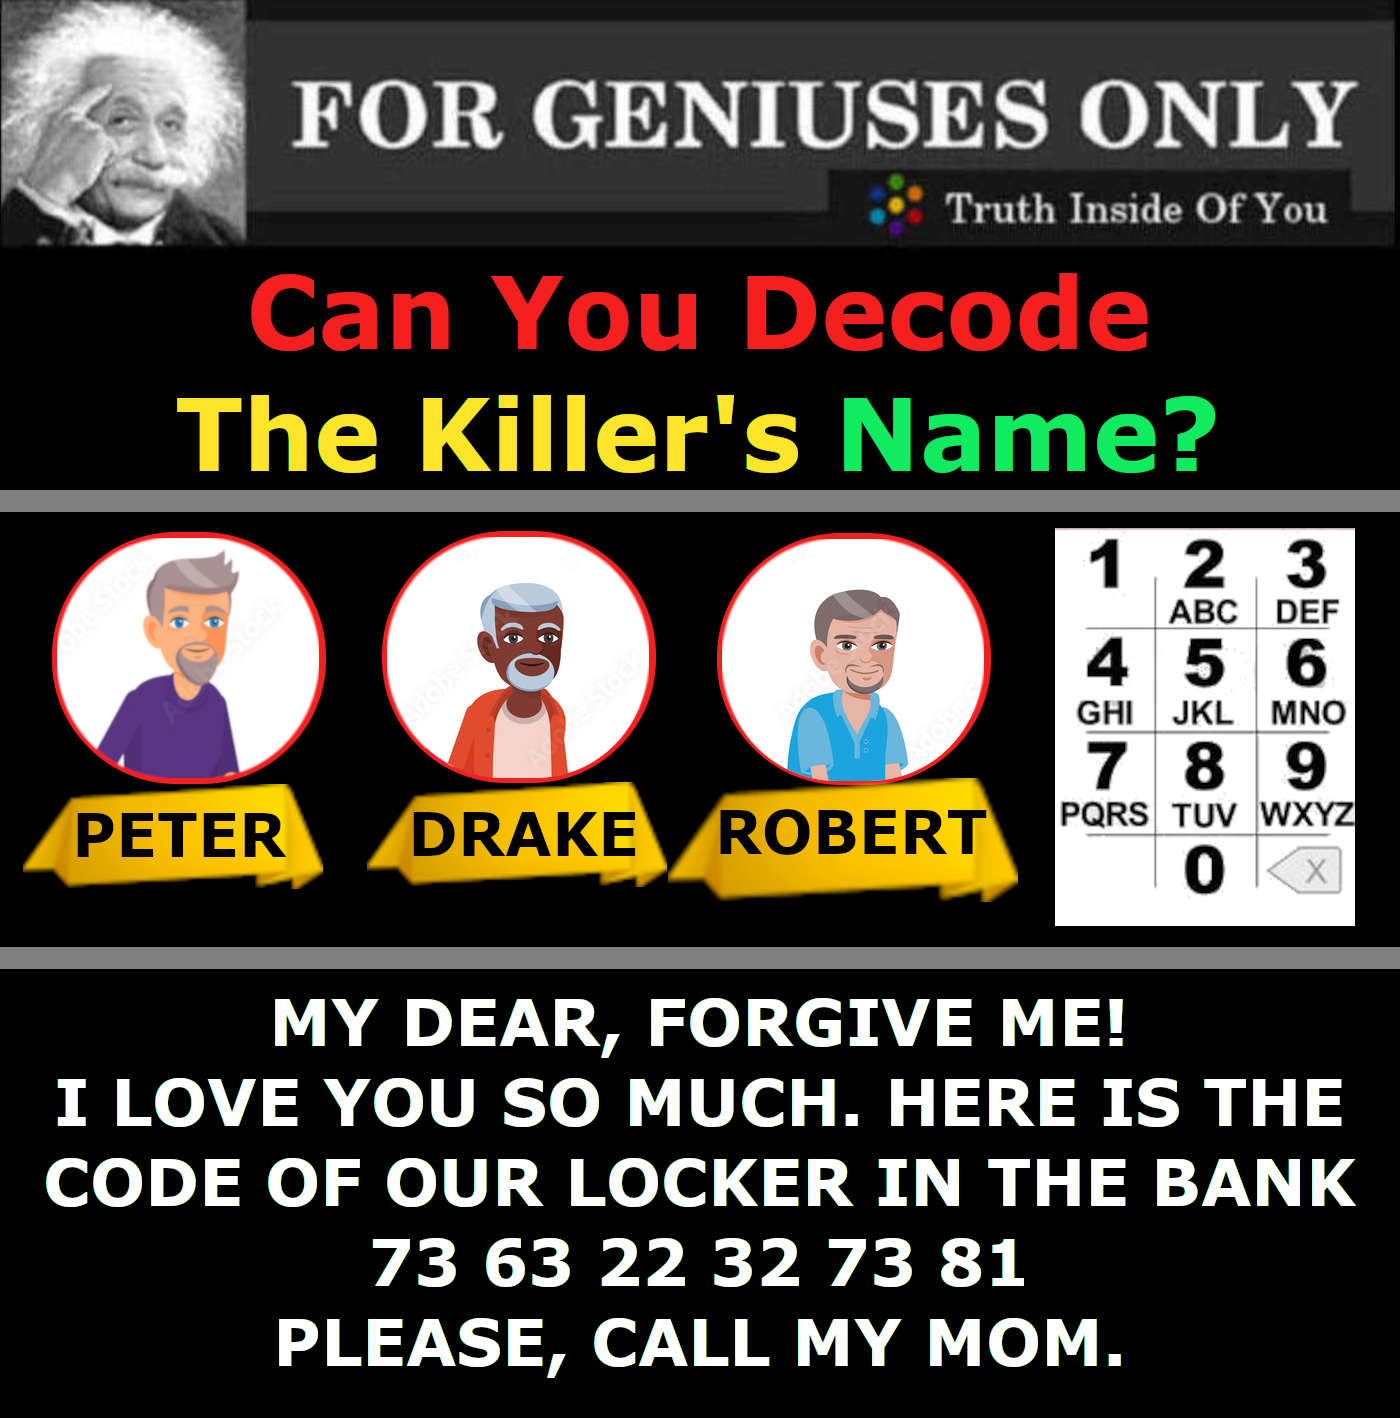 Can You Decode The Killer's Name?